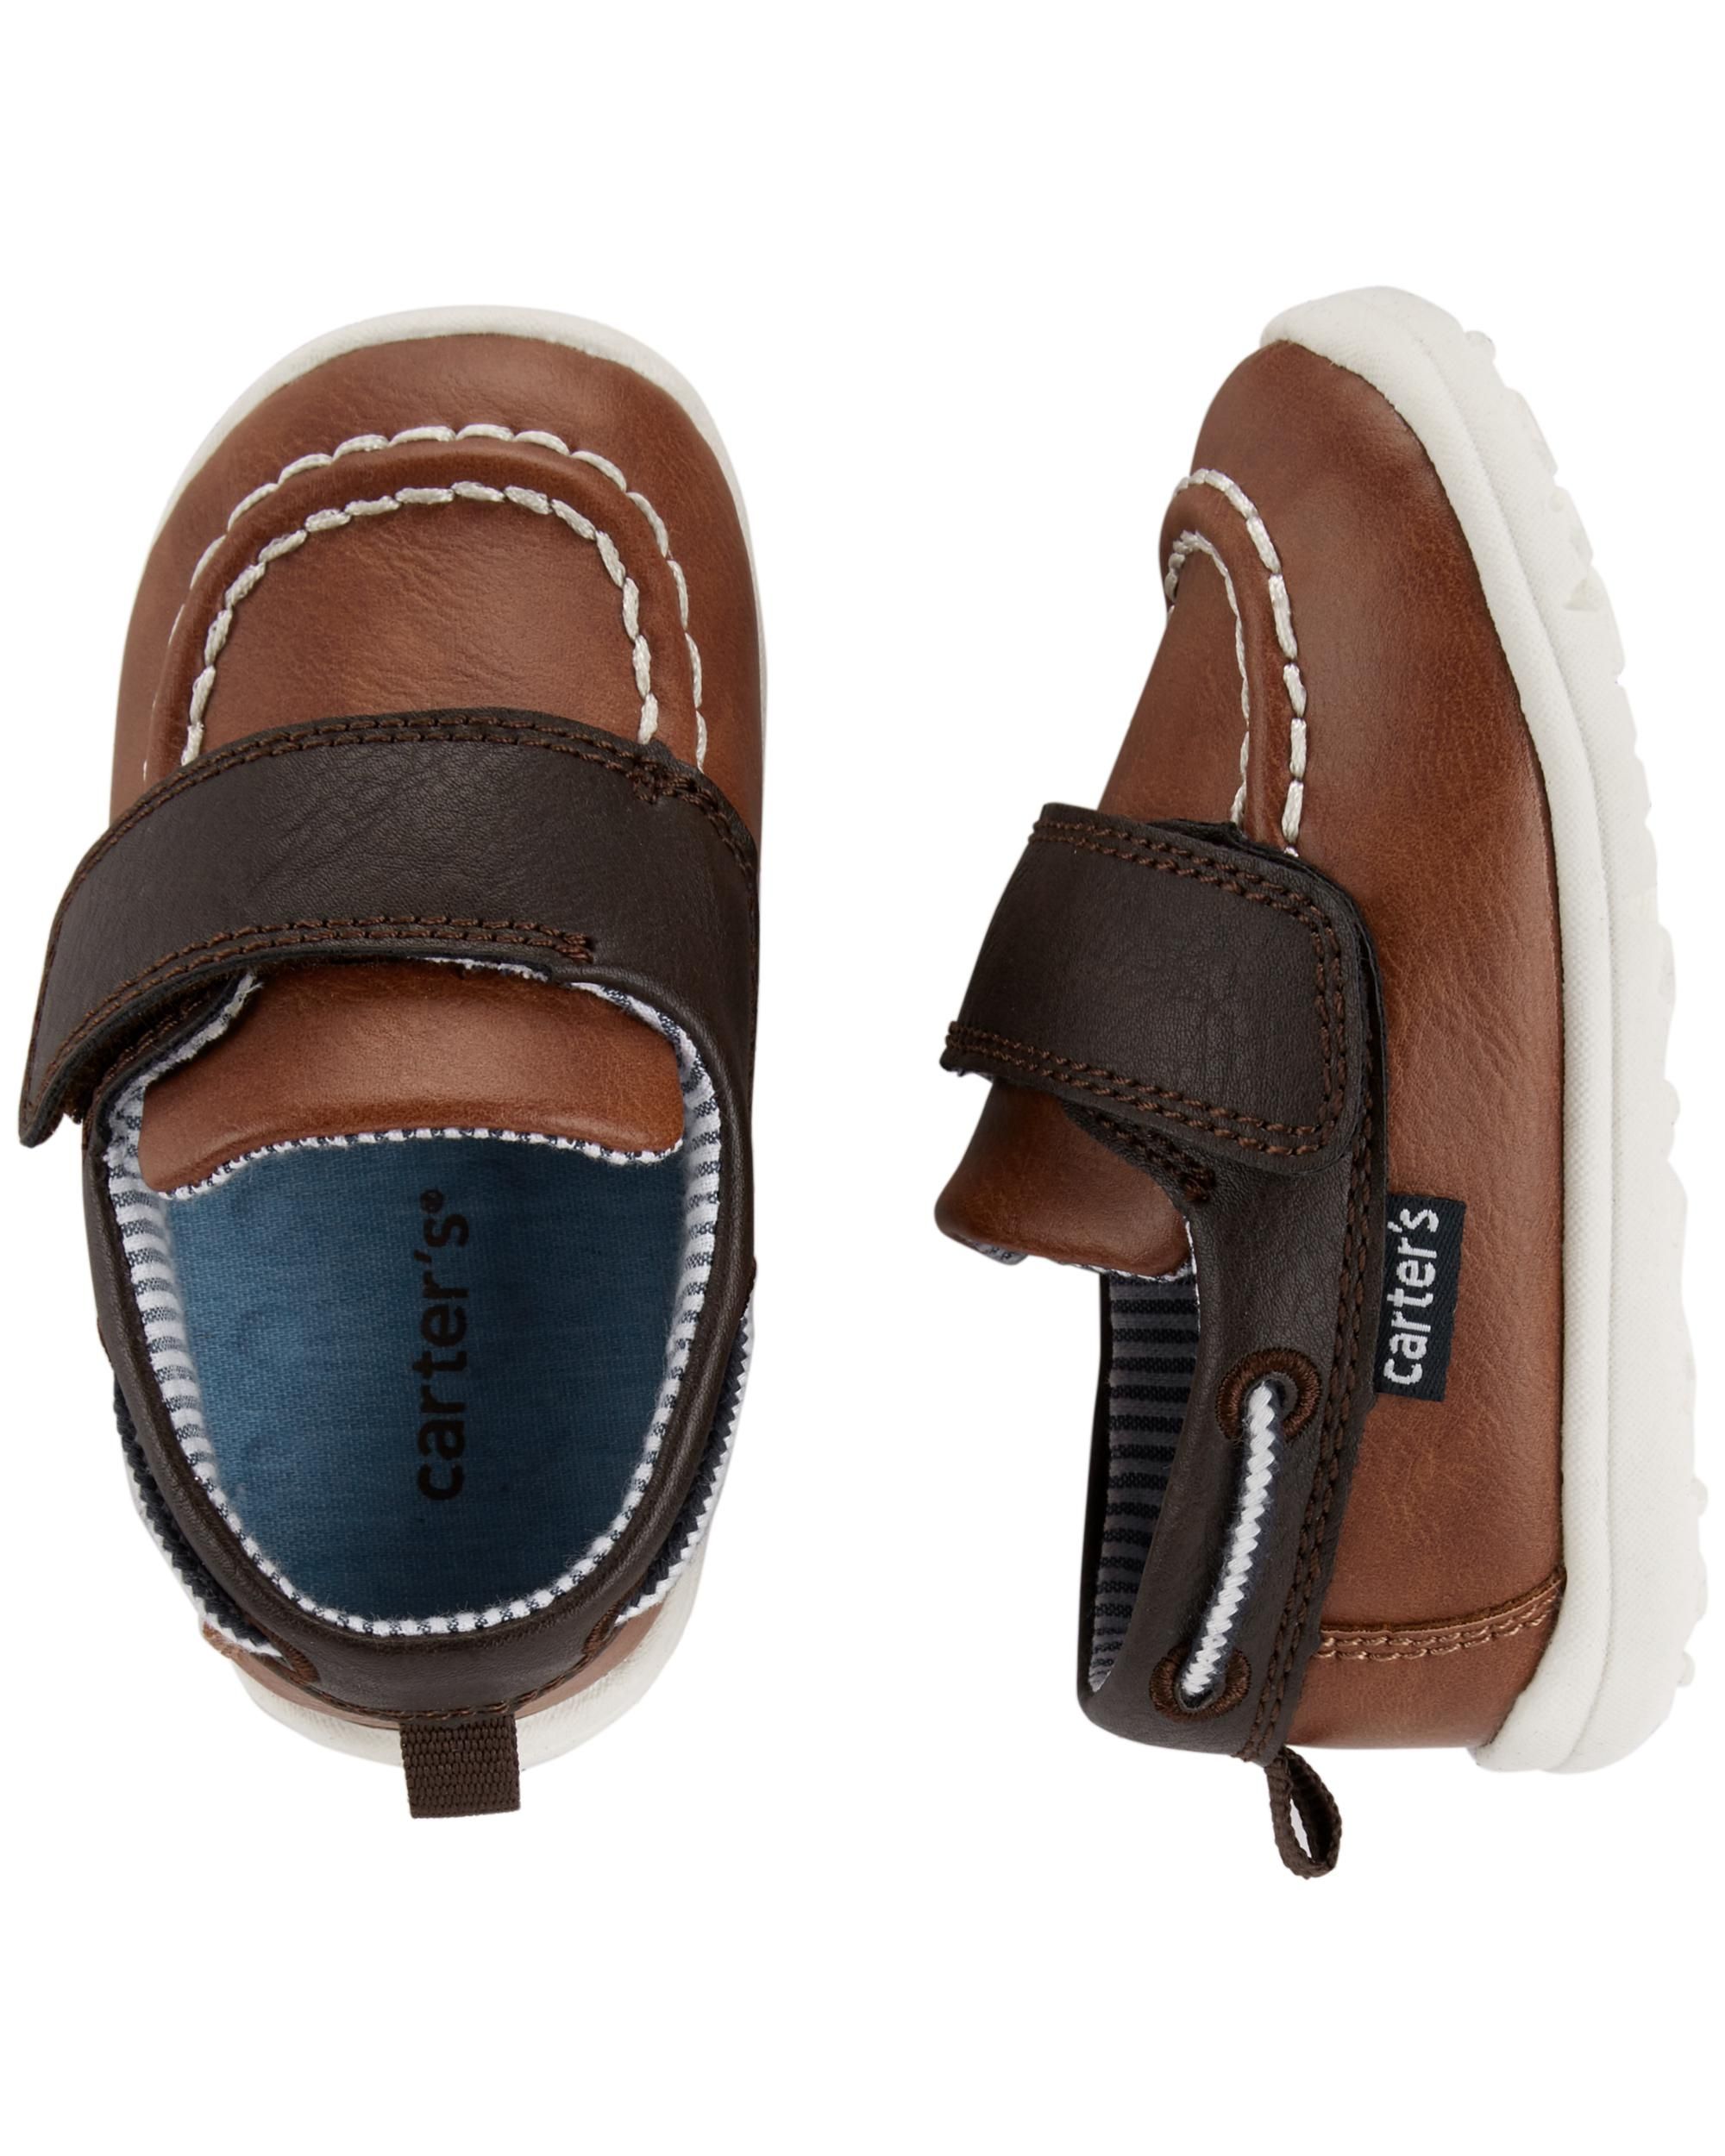 Carter's Every Step Boat Shoes | Carter's